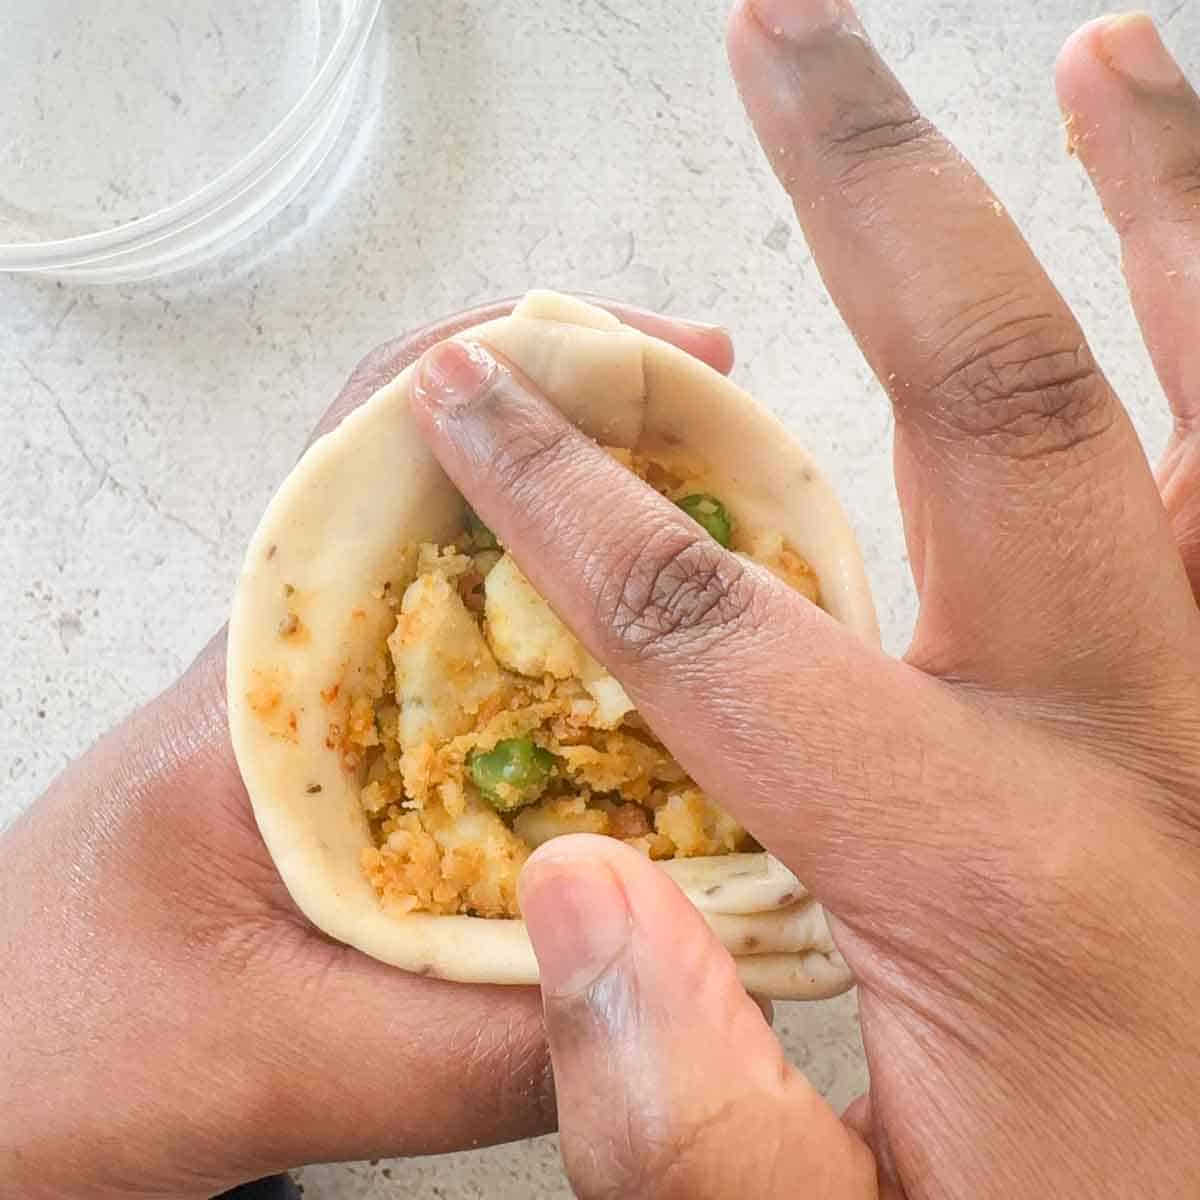 Water being used on the index finger to wet seams of samosa dough.